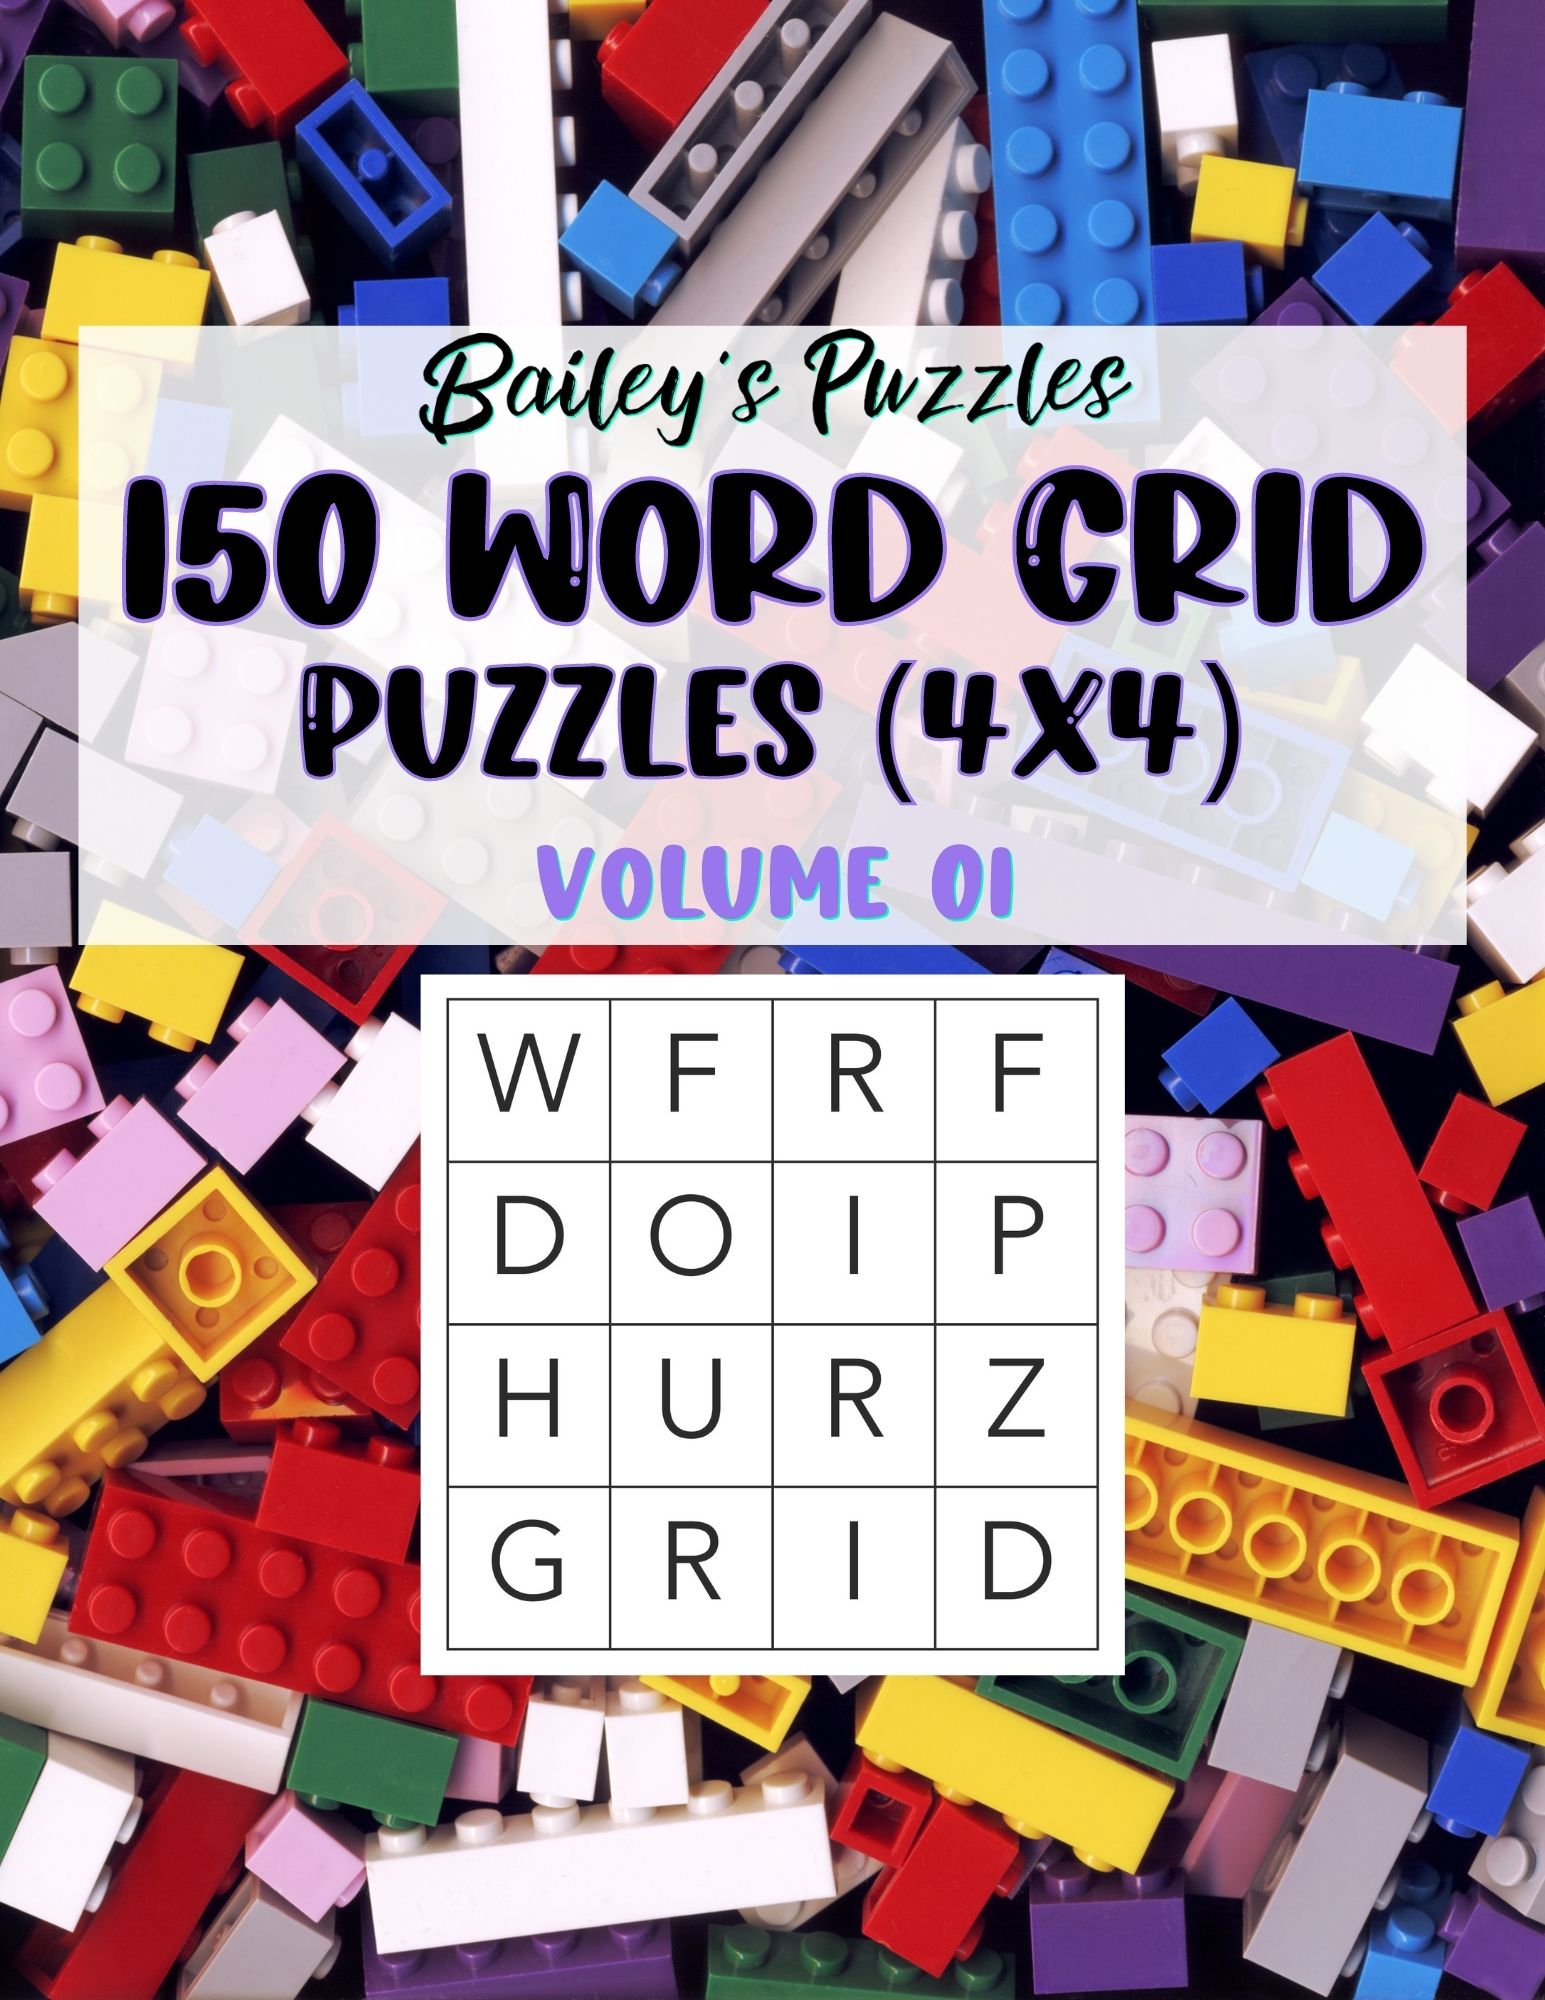 Front Cover - 150 Word Grid Puzzles (4x4)